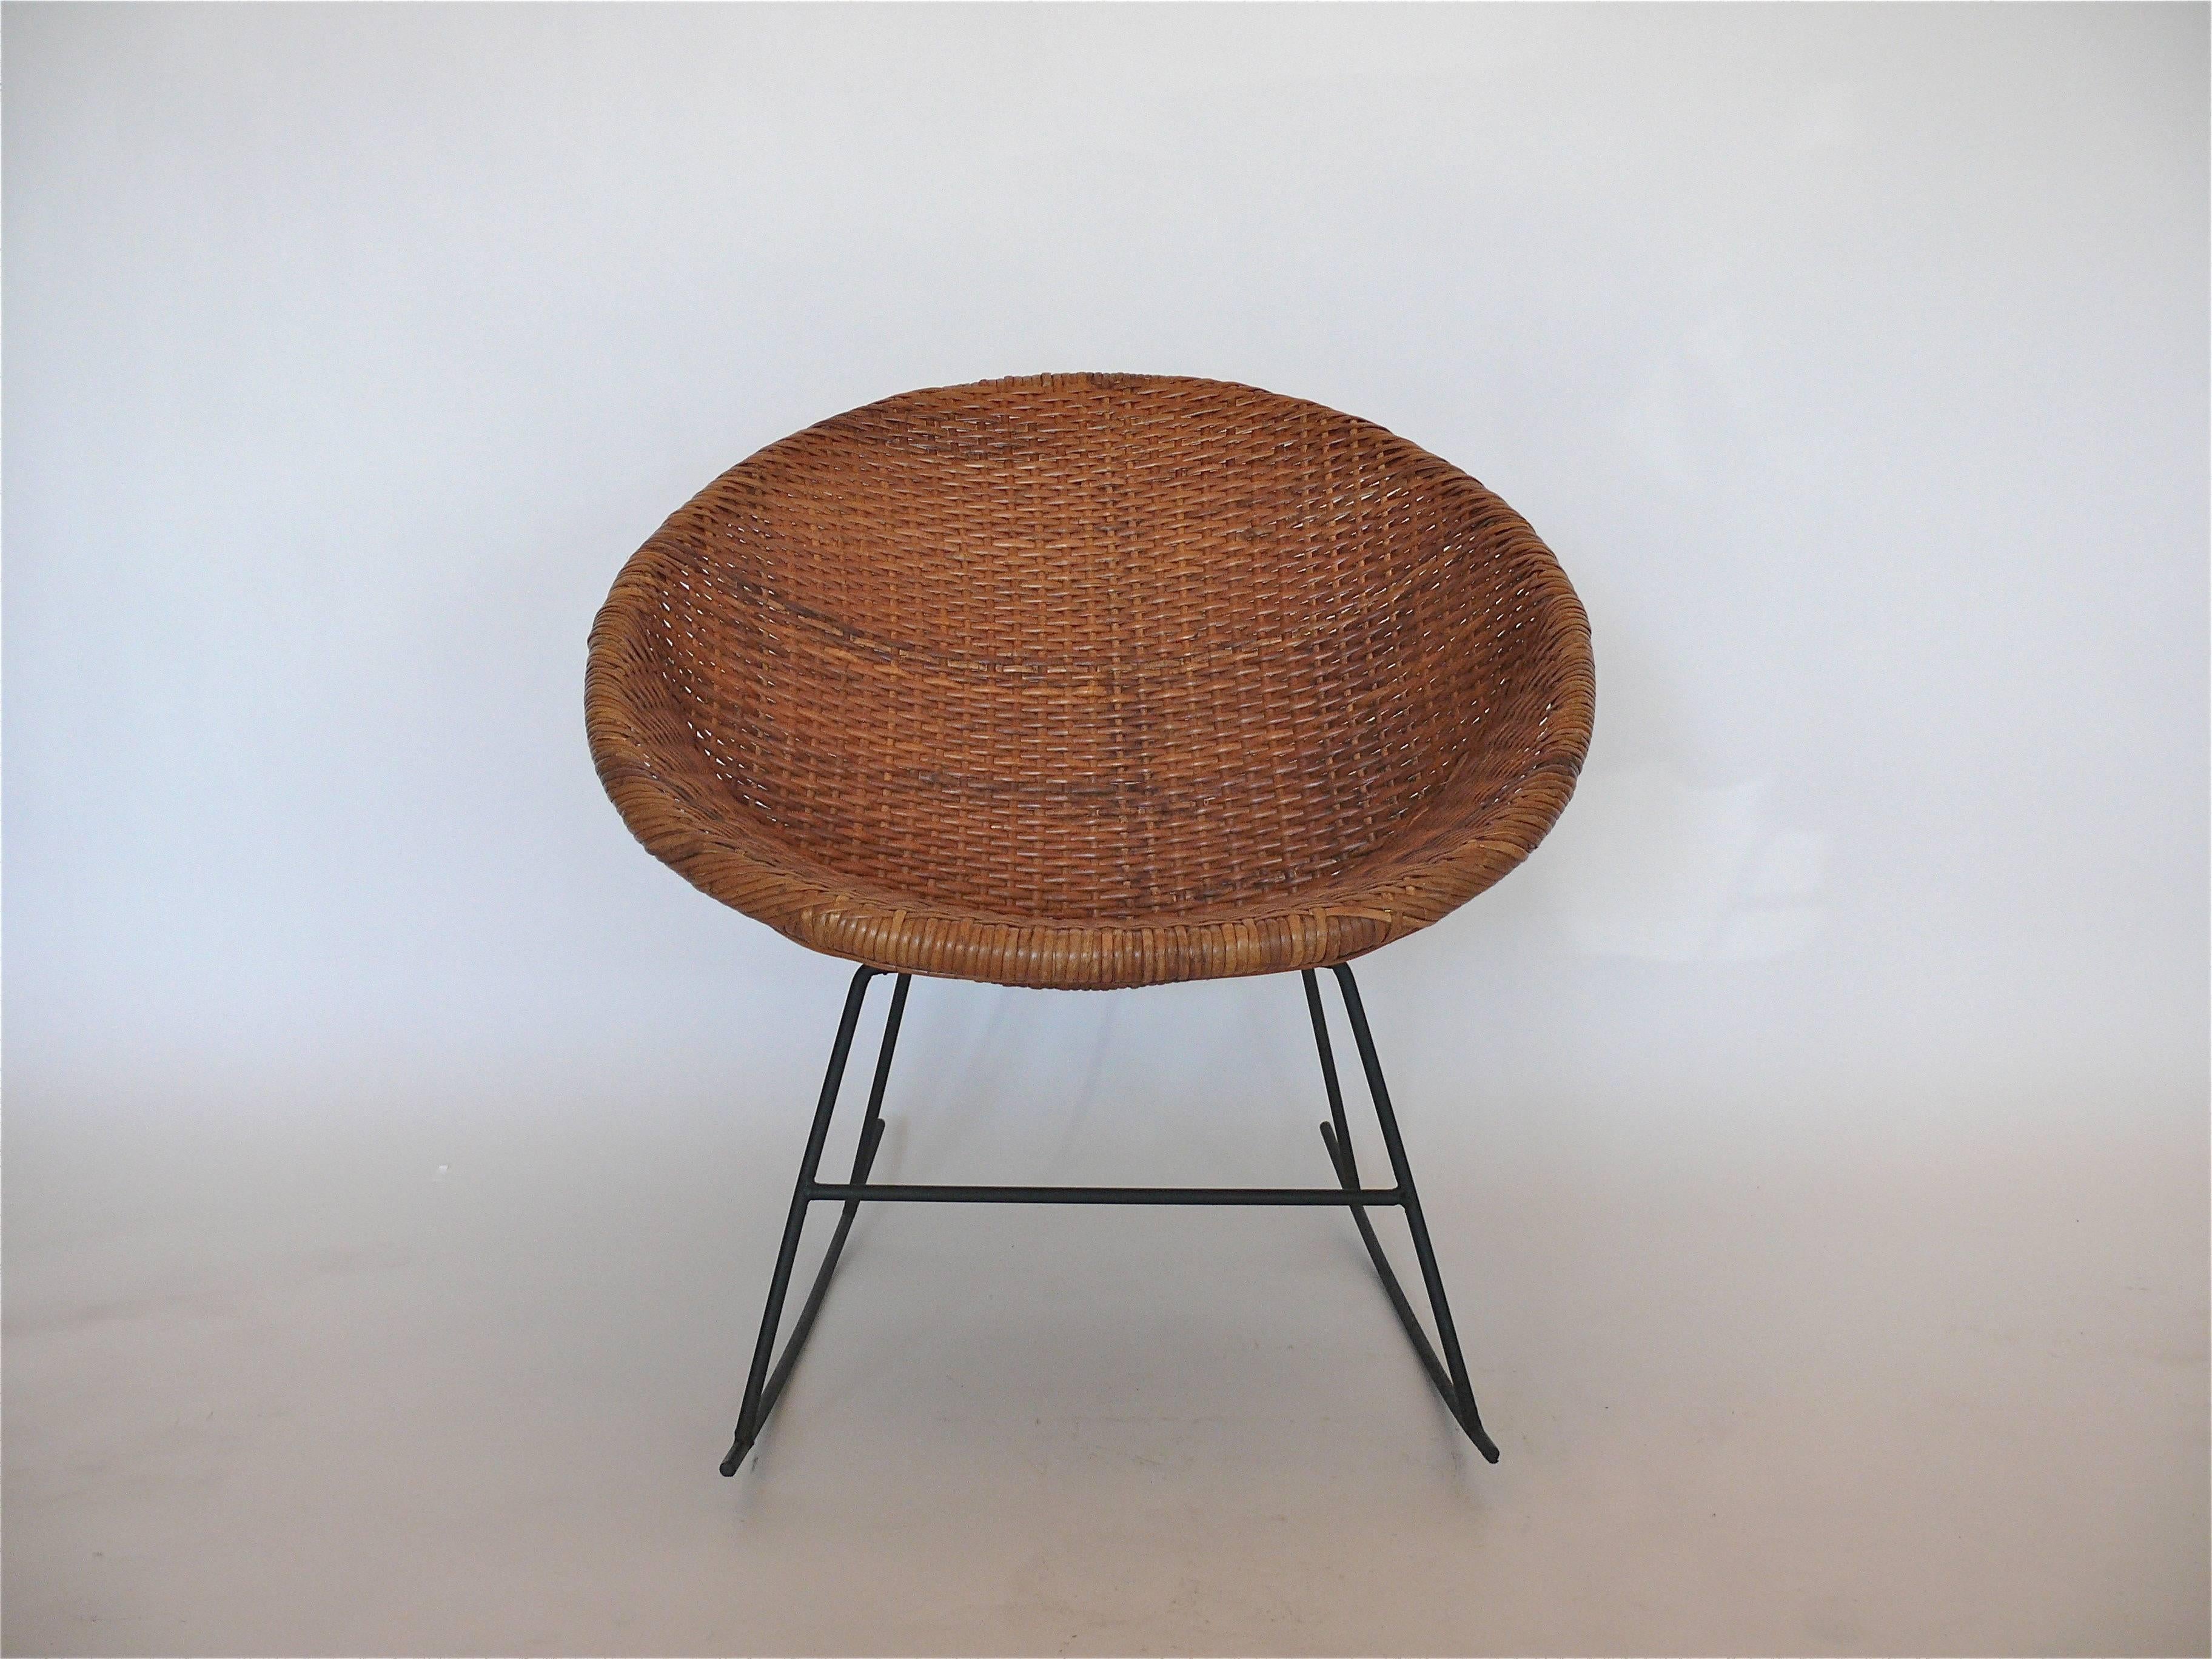 Rare Calif Asia iron and wicker rocker. Manufactured in the Philippines for Calif Asia in the 1960s. A stunning wicker bucket chair sits upon an iron rocker base. Perfect for corner in any room!
Excellent original condition.
A matching rocker